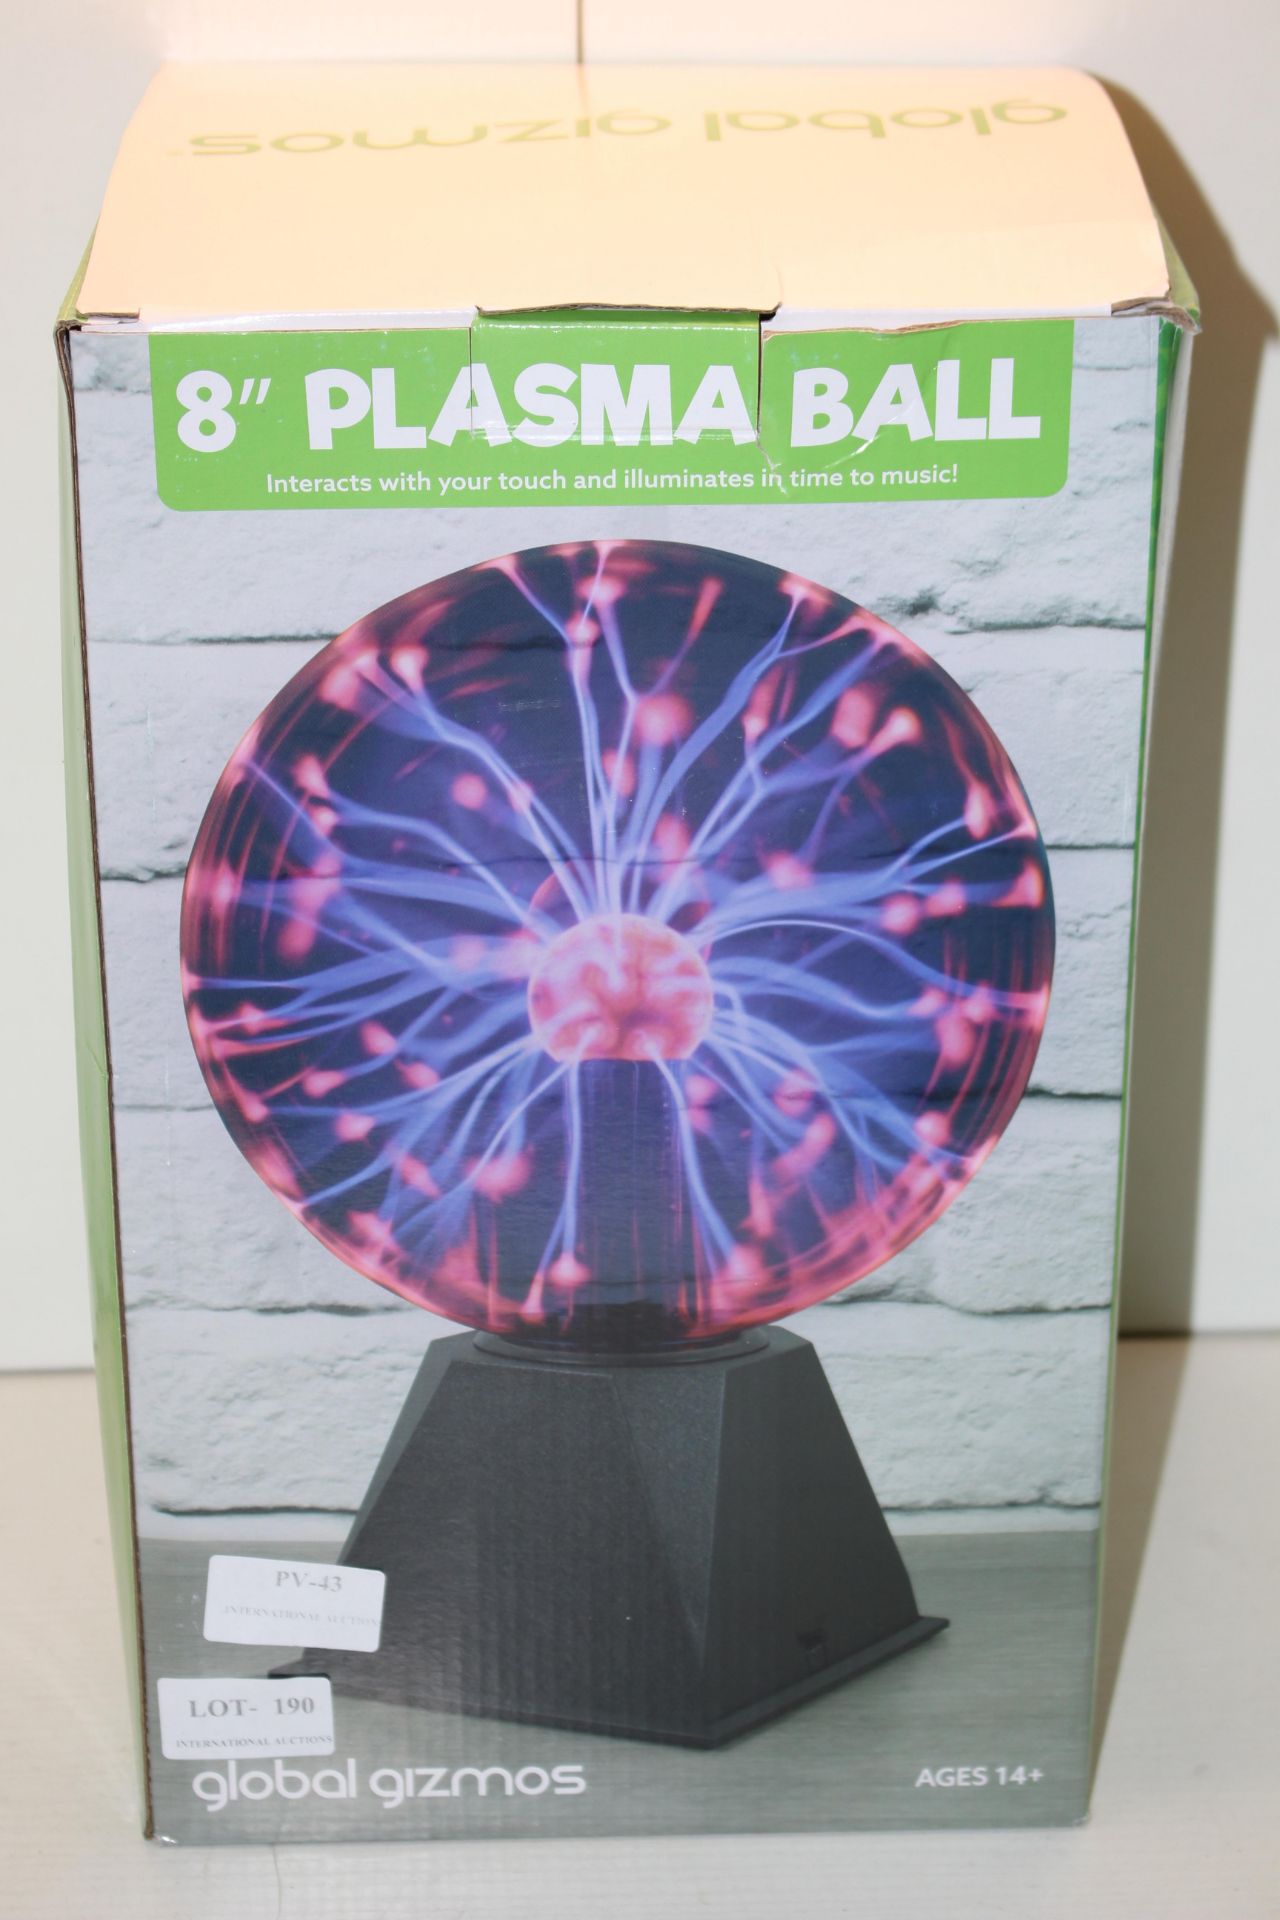 BOXED GLOBAL GIZMOS 8" PLASMA BALL RRP £21.99Condition ReportAppraisal Available on Request- All